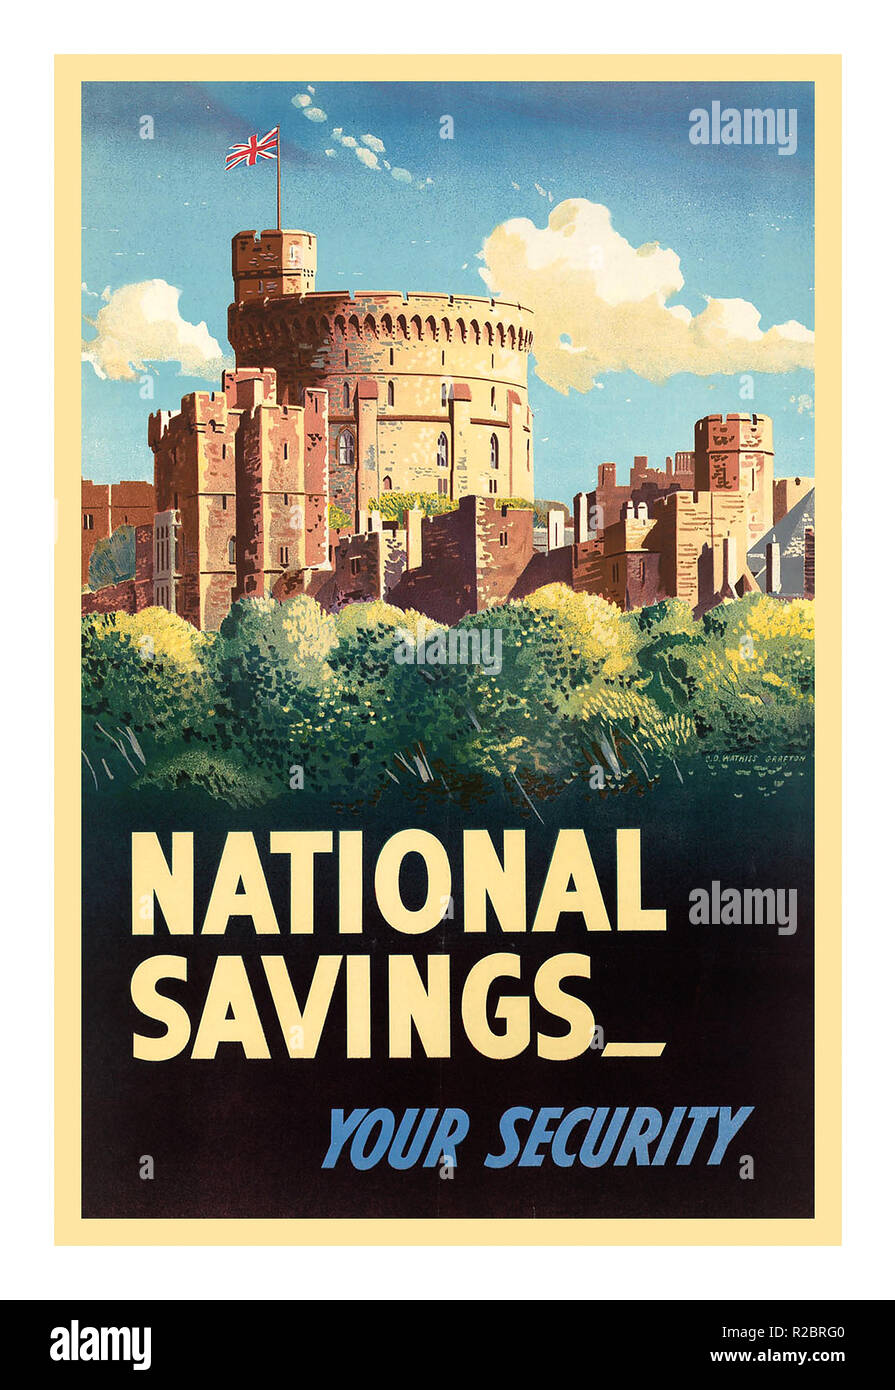 NATIONAL SAVINGS WW2 1940's UK Propaganda Appeals Poster. 'National Savings--your security'  Issued by the National Savings Committee. Featuring historic Royal Windsor Castle Berkshire flying the Union Jack Flag World War II 1939-1945 Great Britain Posters Bonds and War finance Savings bonds Stock Photo